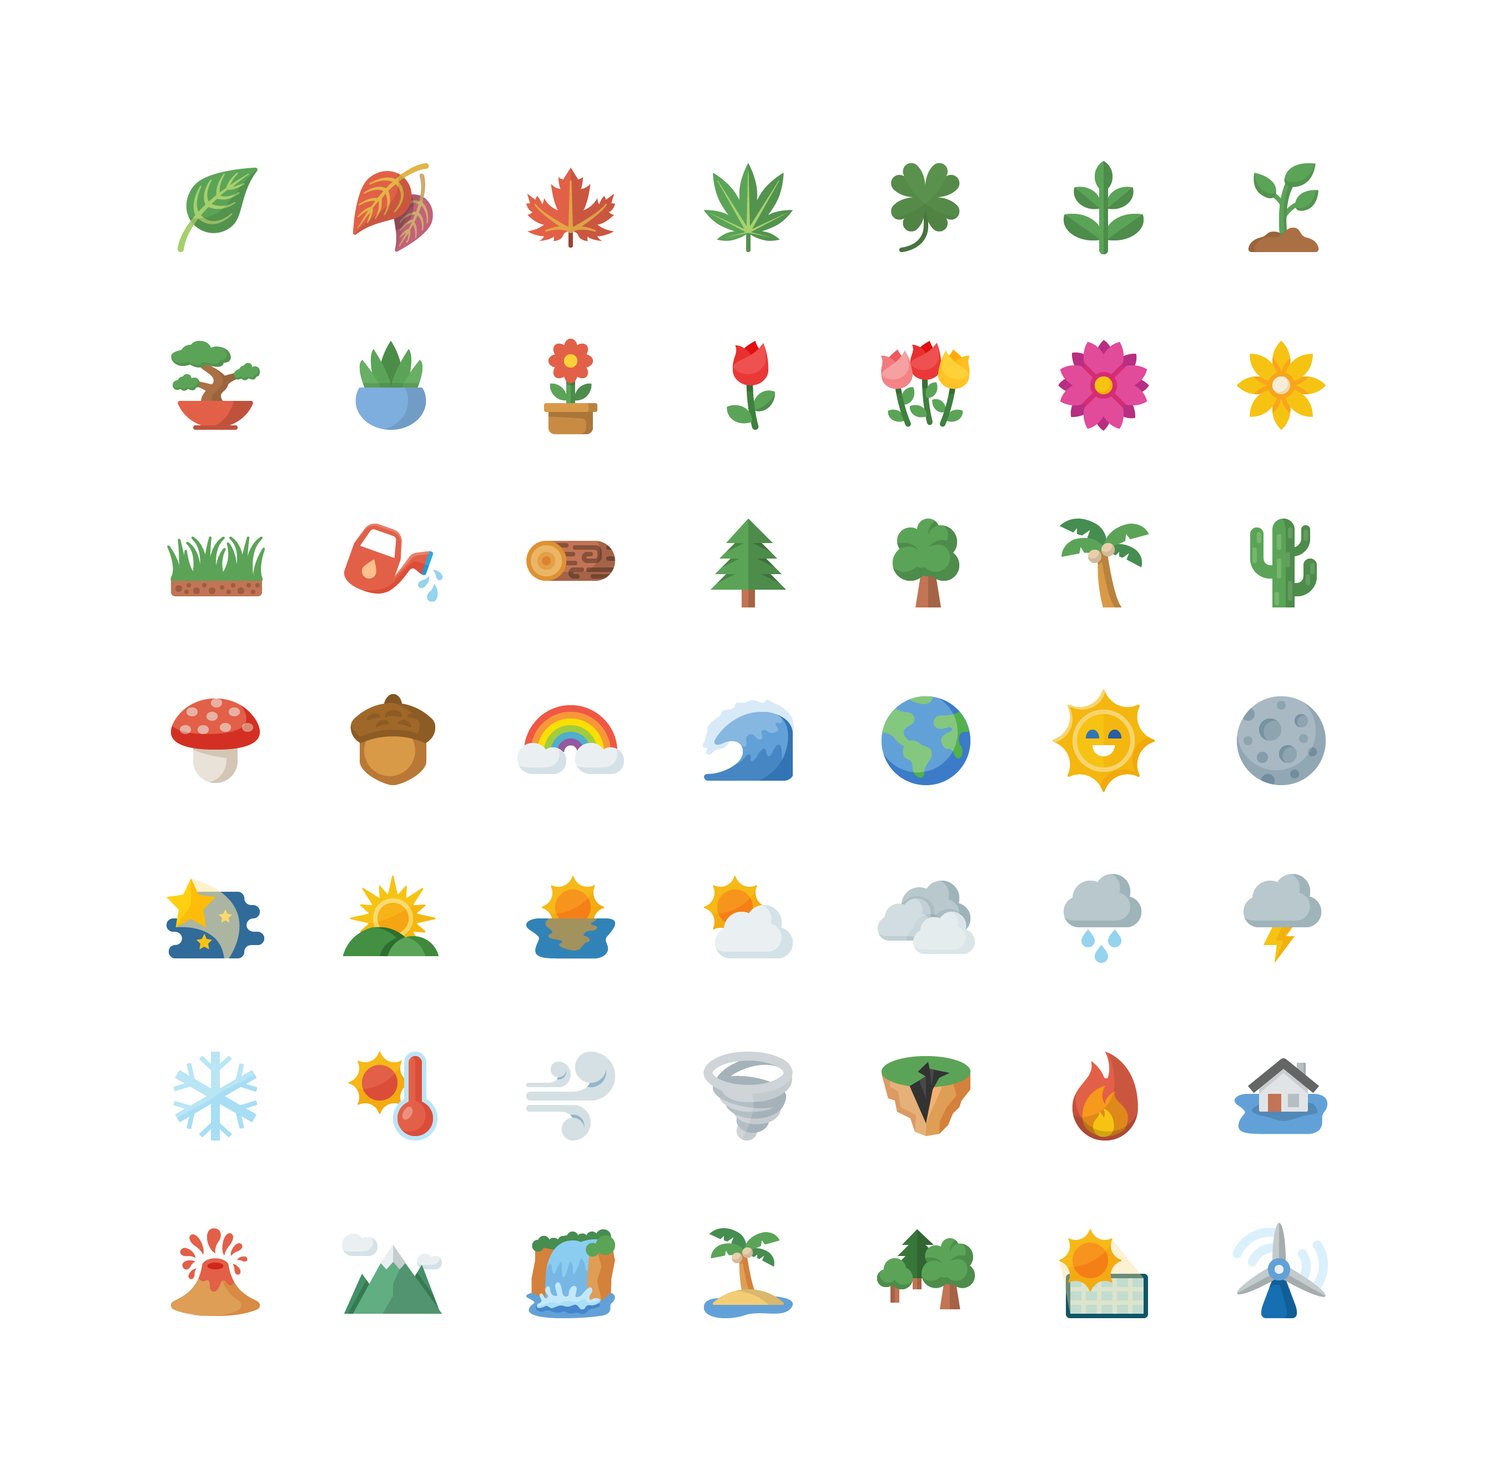 Nature Emoji - 49 Vector Icons cover image.